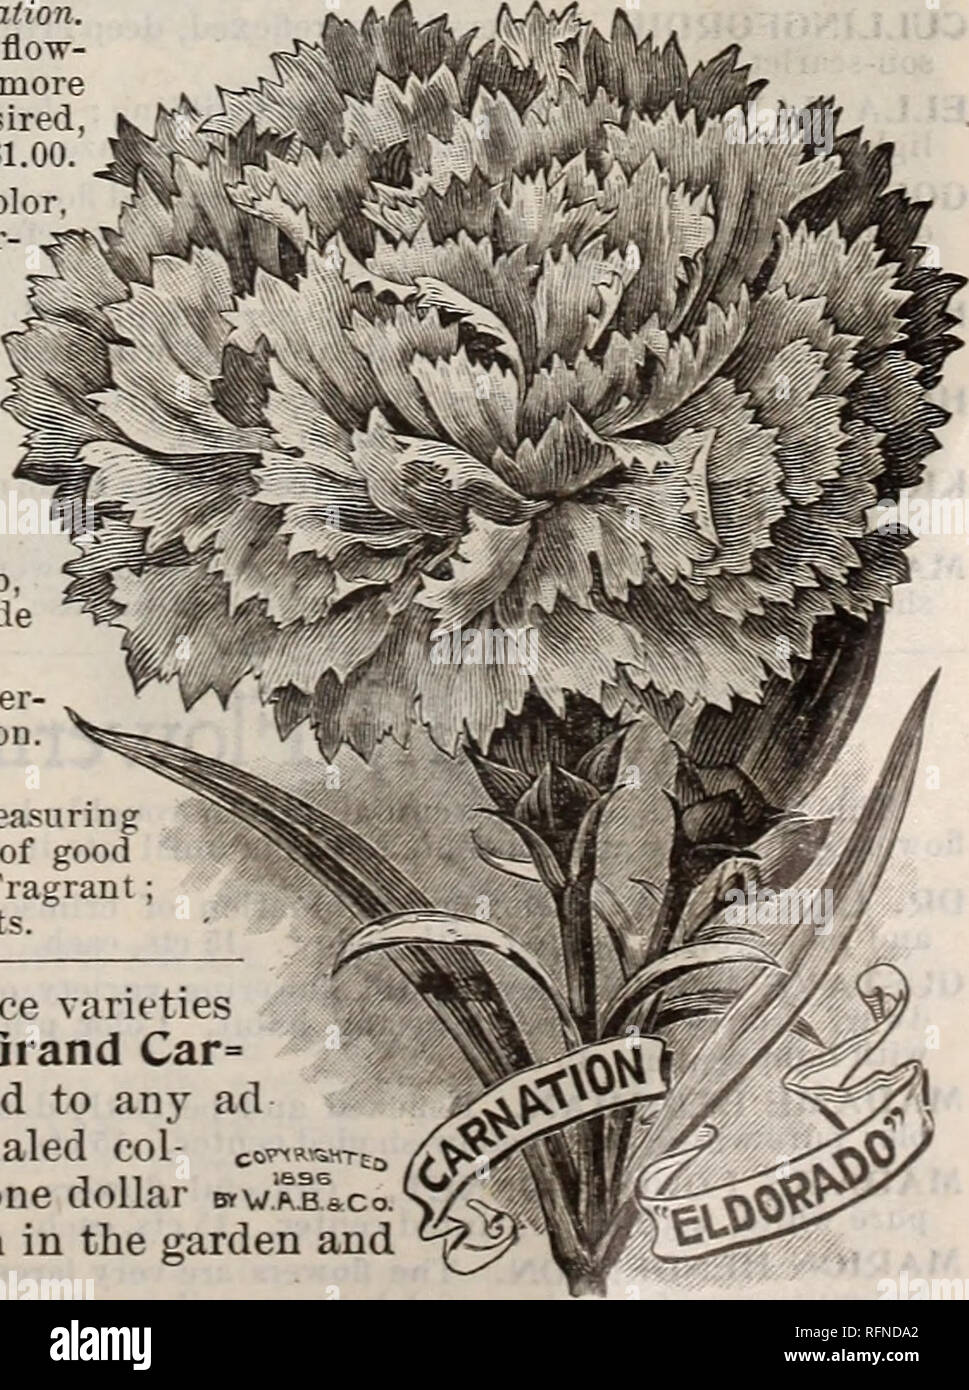 . Burpee's farm annual written at Fordhook Farm. Nurseries (Horticulture) Pennsylvania Philadelphia Catalogs; Vegetables Seeds Catalogs; Plants, Ornamental Catalogs; Flowers Seeds Catalogs. CHOICE CARNATIONS FOR 50 CTS- With the change of one variety, this is the same collection that was so popular t year. Our idea in making up these compact and popular plant col- lections is to select varieties each of which shall be so good and distinct that the purchaser will want them all. The prices also are low aud popular, while the plants are strong and well-rooted, all ready to begin blooming. With ea Stock Photo